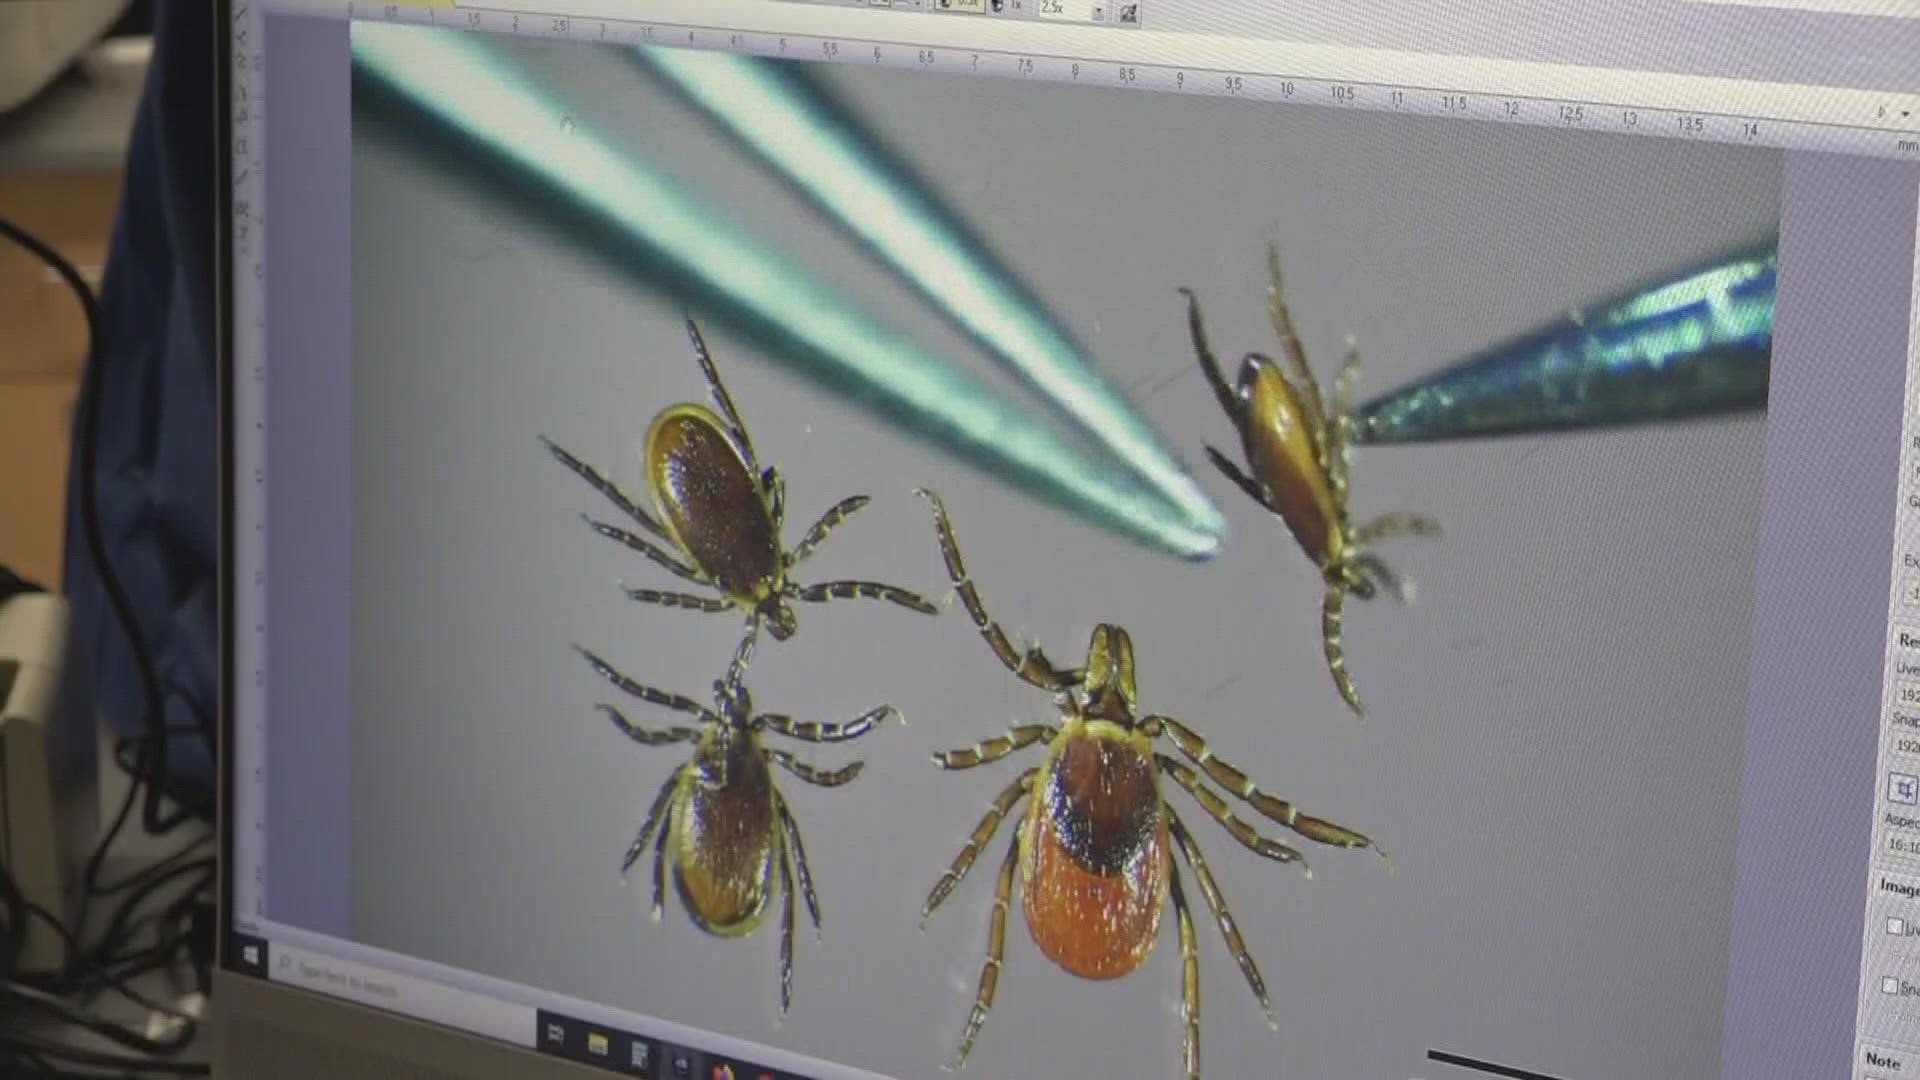 The University of Maine Tick Lab is seeing an increase in deer tick samples compared to this time last year.